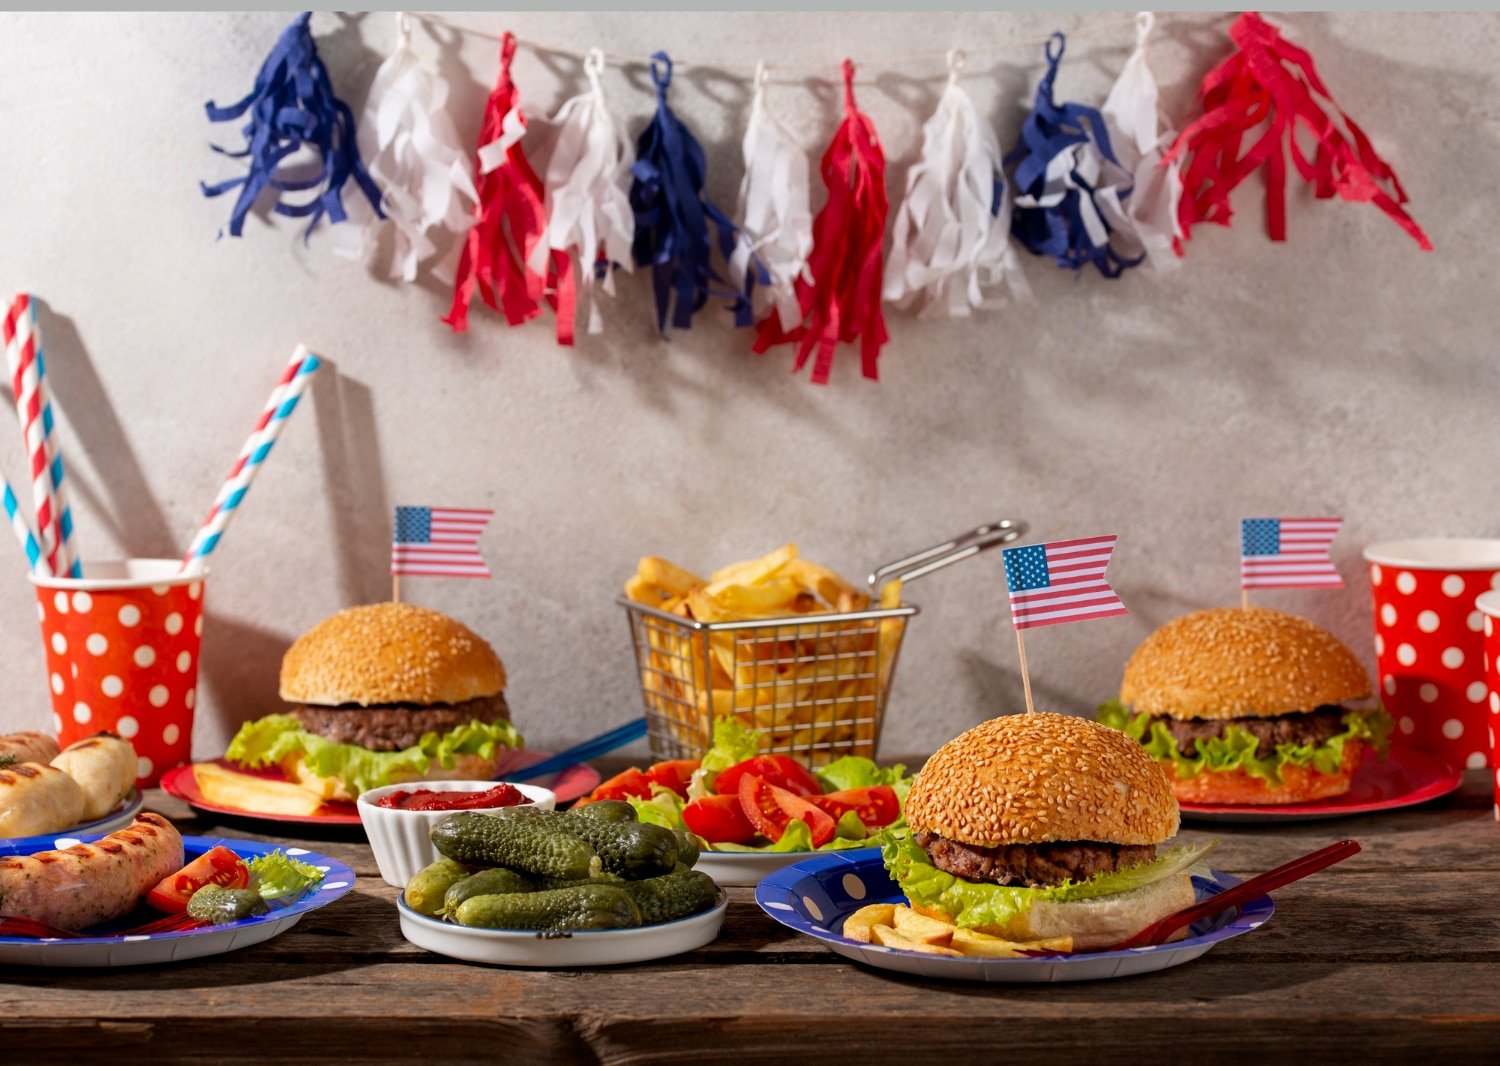 Shop American Snacks And Goods At My American Shop FR